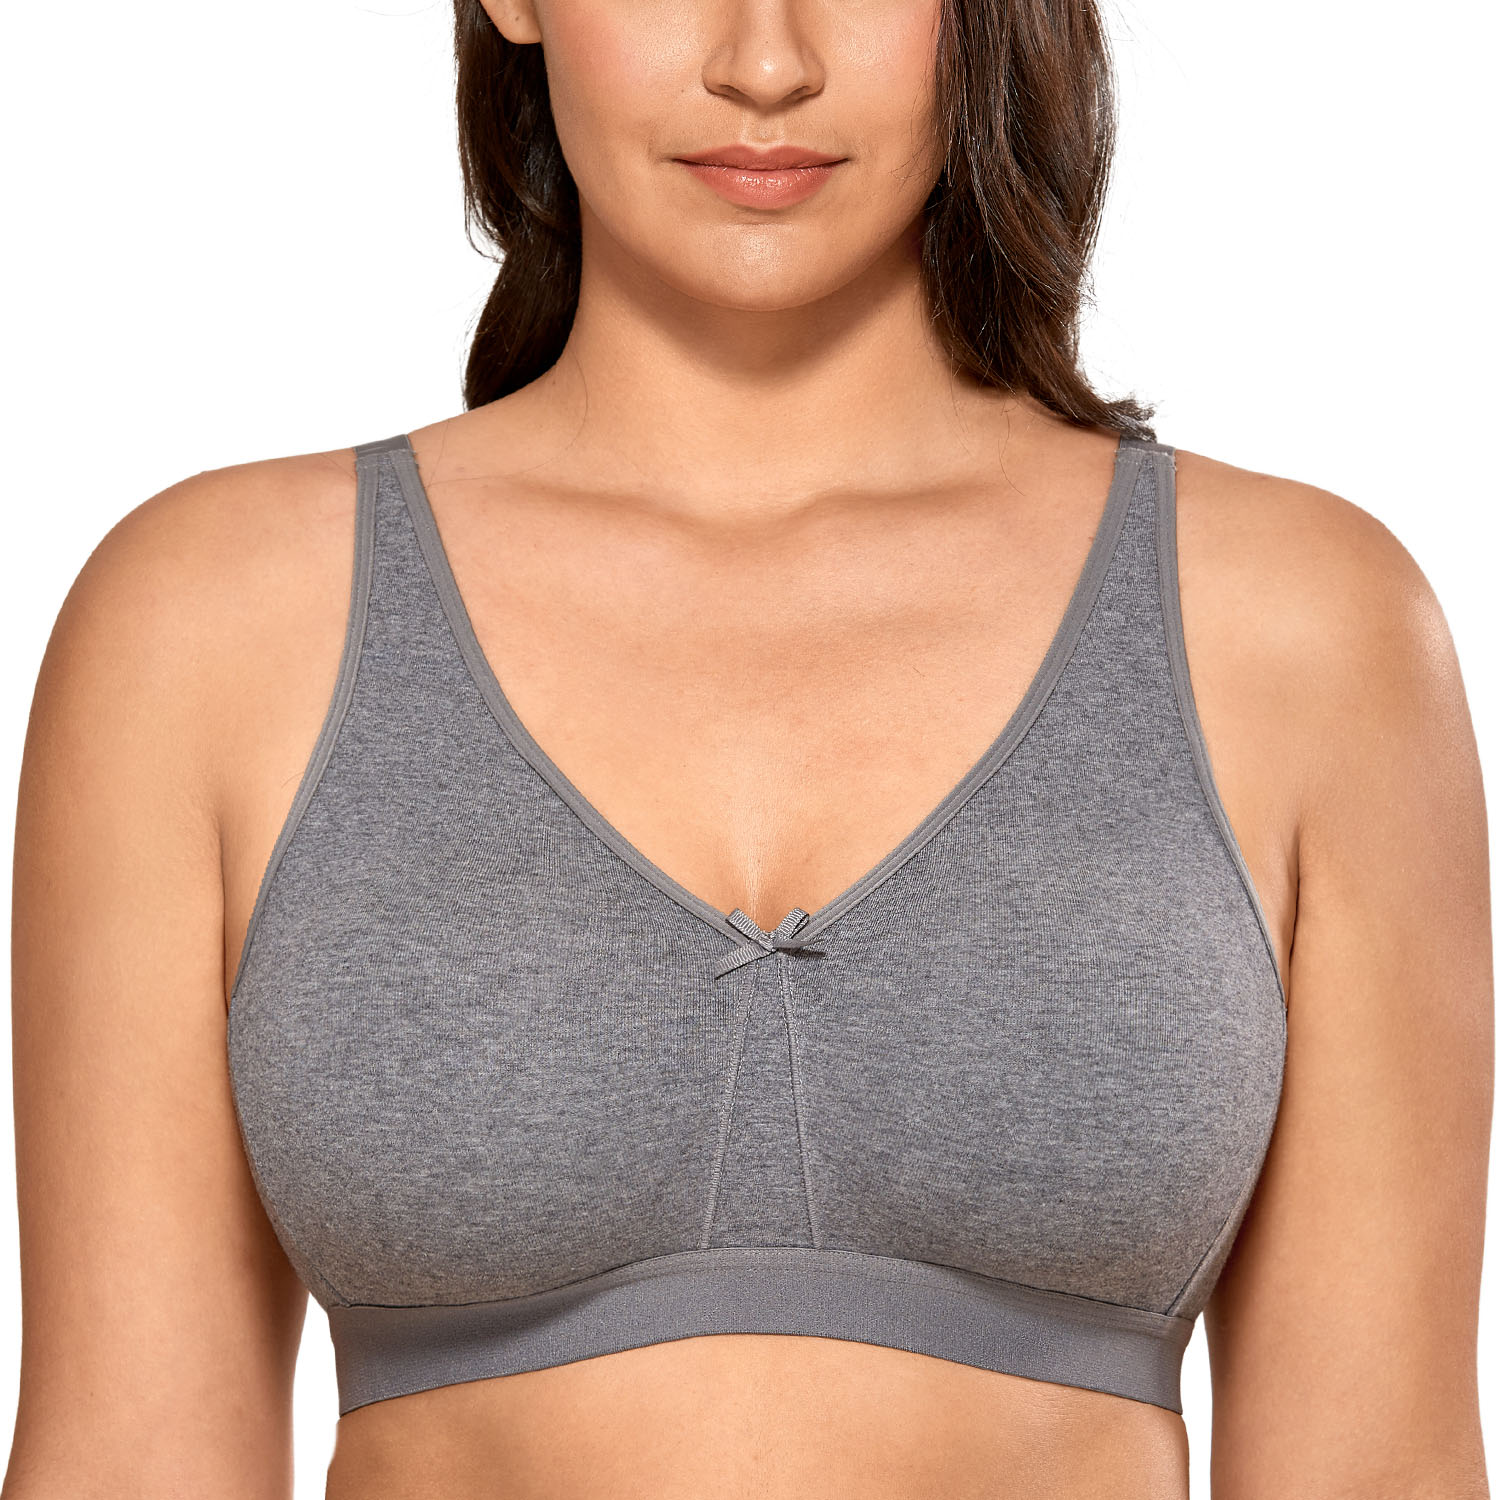 AISILIN Women's Plus Size Bras Minimizer Underwire Seamless Unlined Cup 